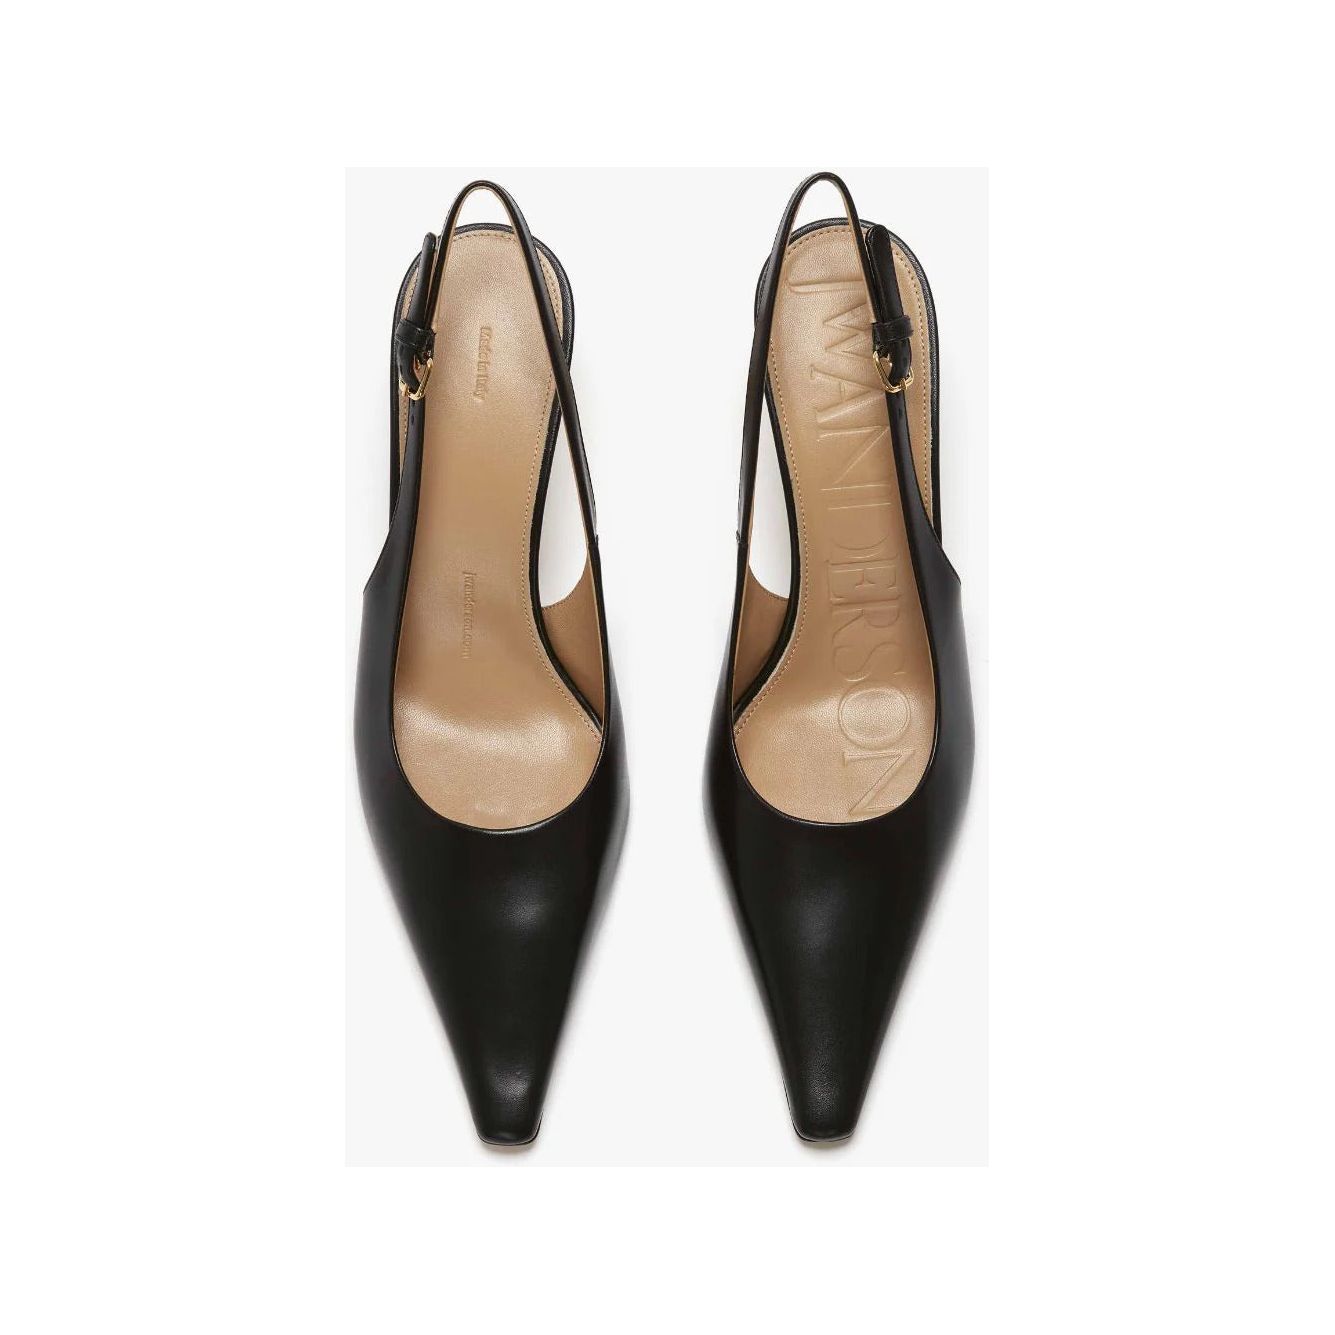 JW ANDERSON CHAIN HEEL LEATHER SHOES - Yooto